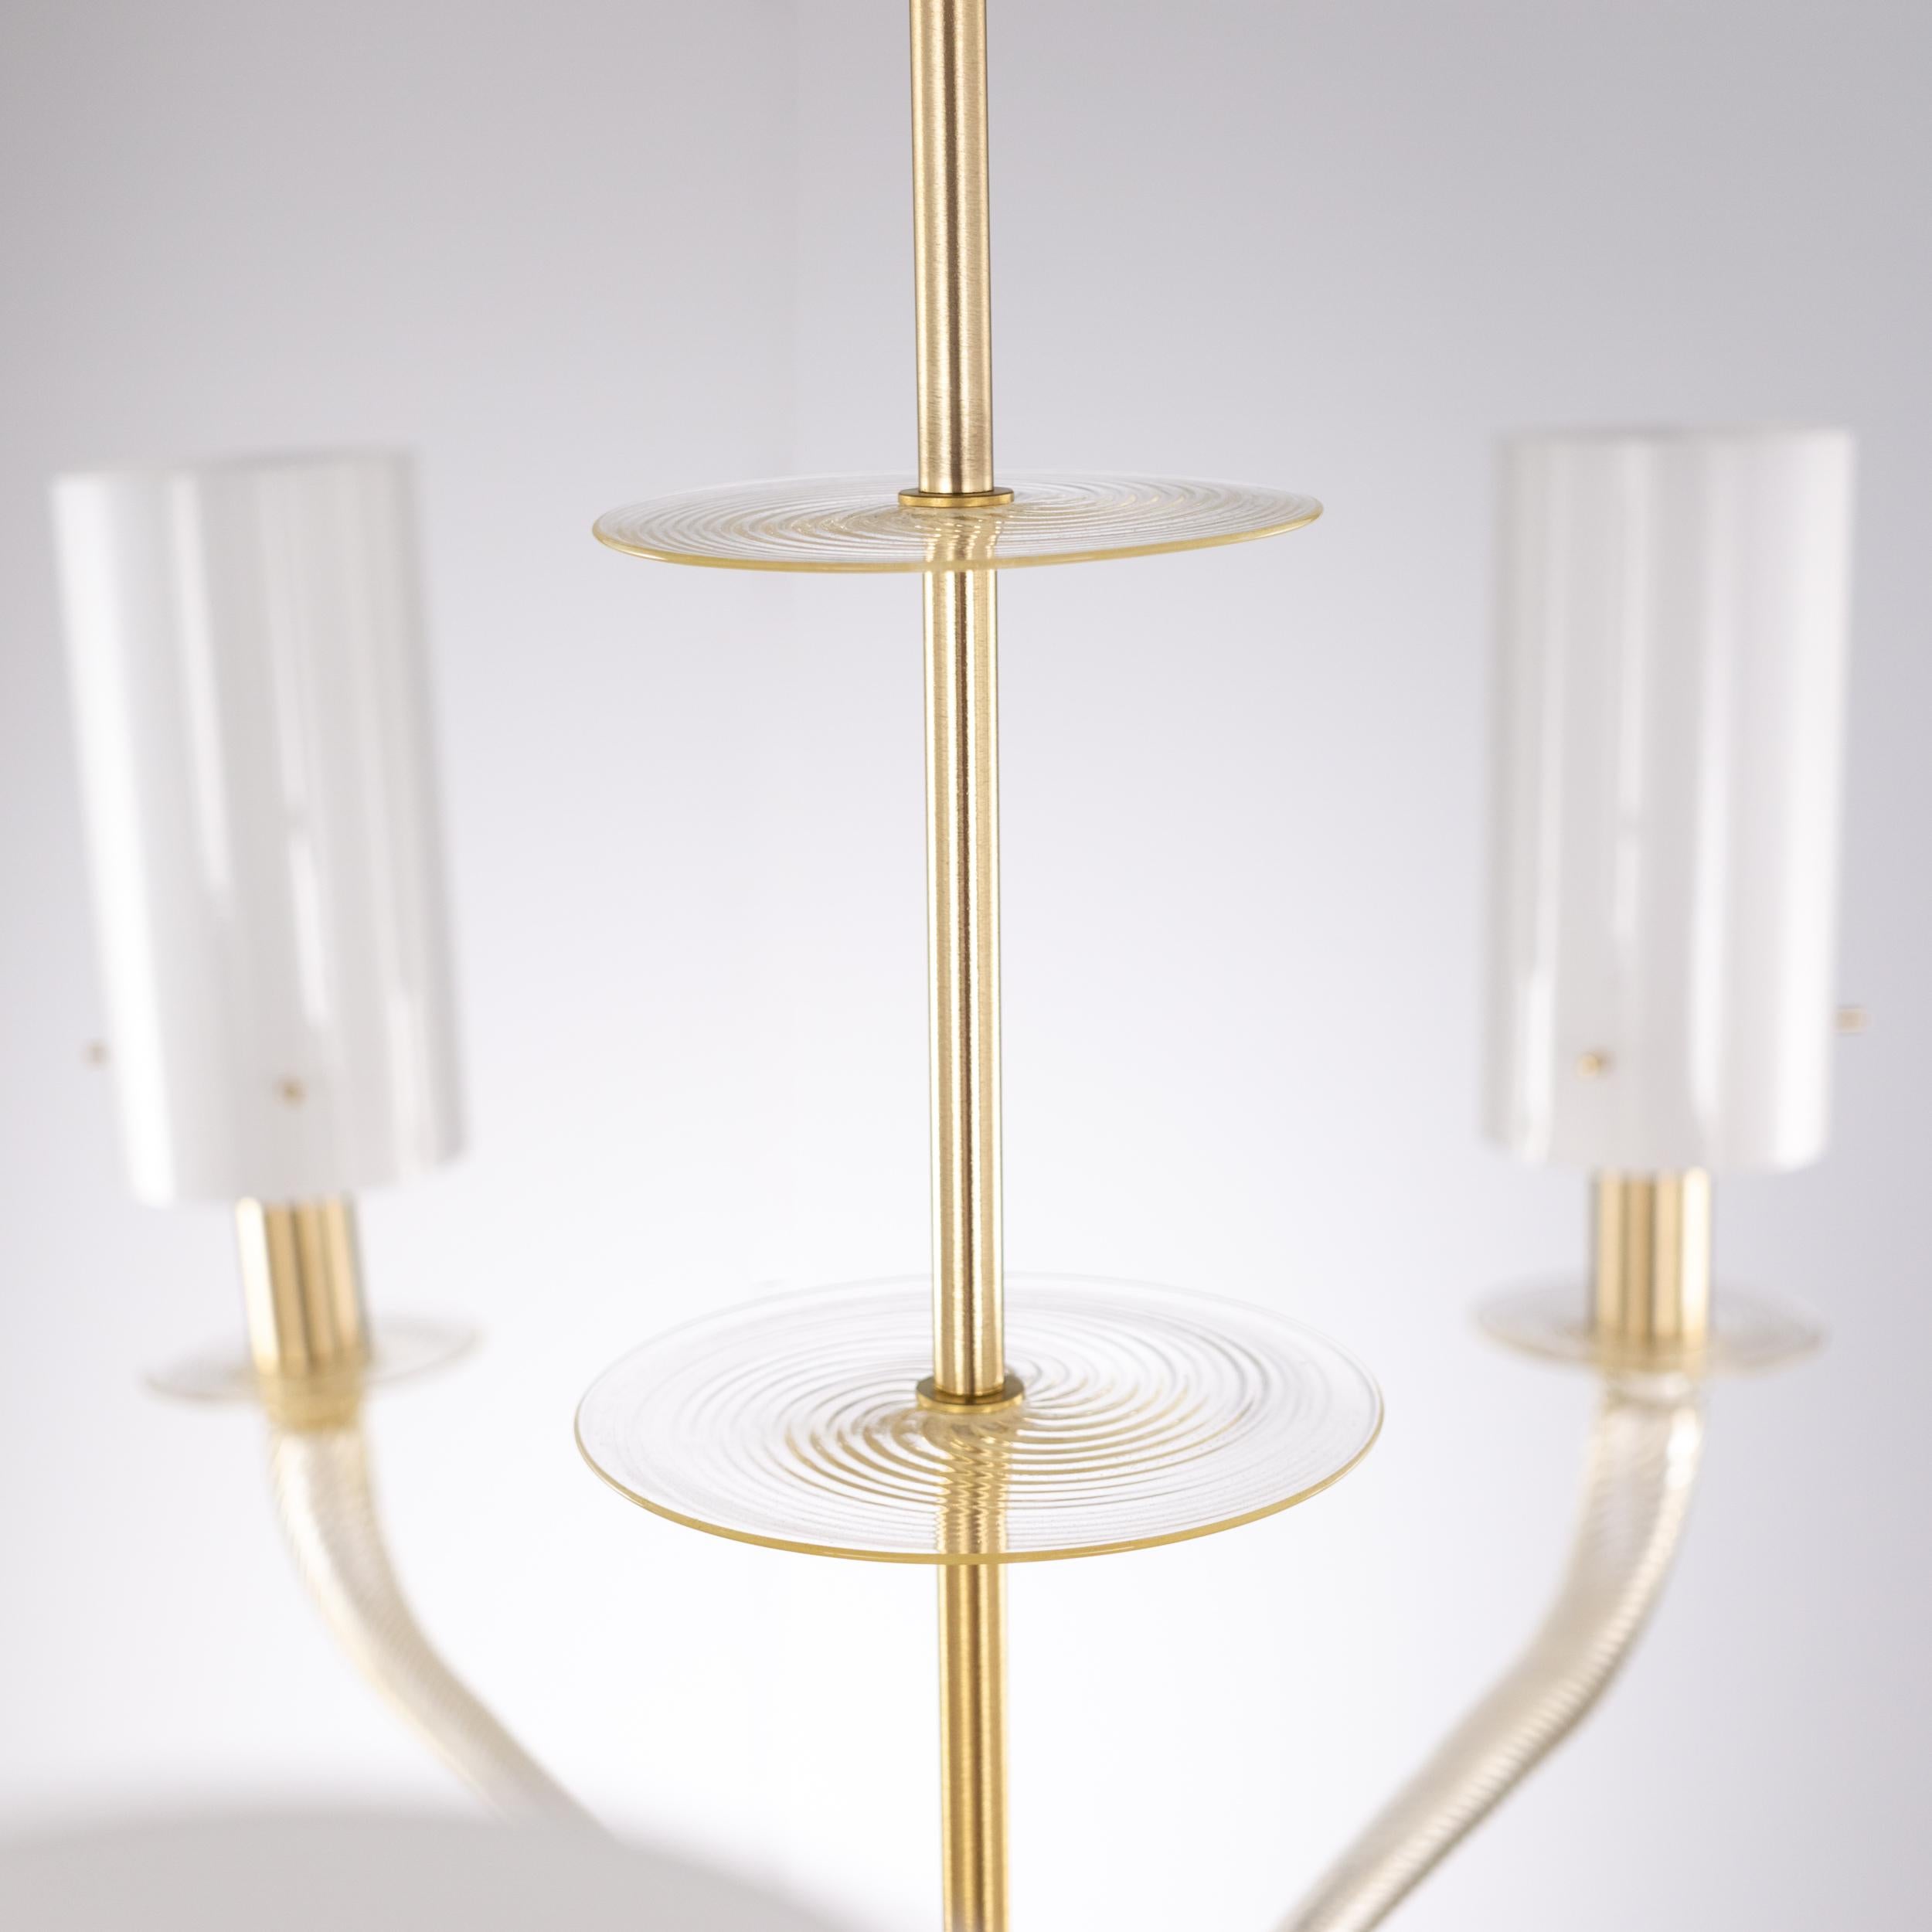 Venetian chandelier Tribeca, 7 arms, white Murano glass, gold fixture by Multiforme.
Tribeca is a design Murano glass chandelier totally re-invented with respect to Classic venetian chandeliers, it is designed using new structures and new elements;